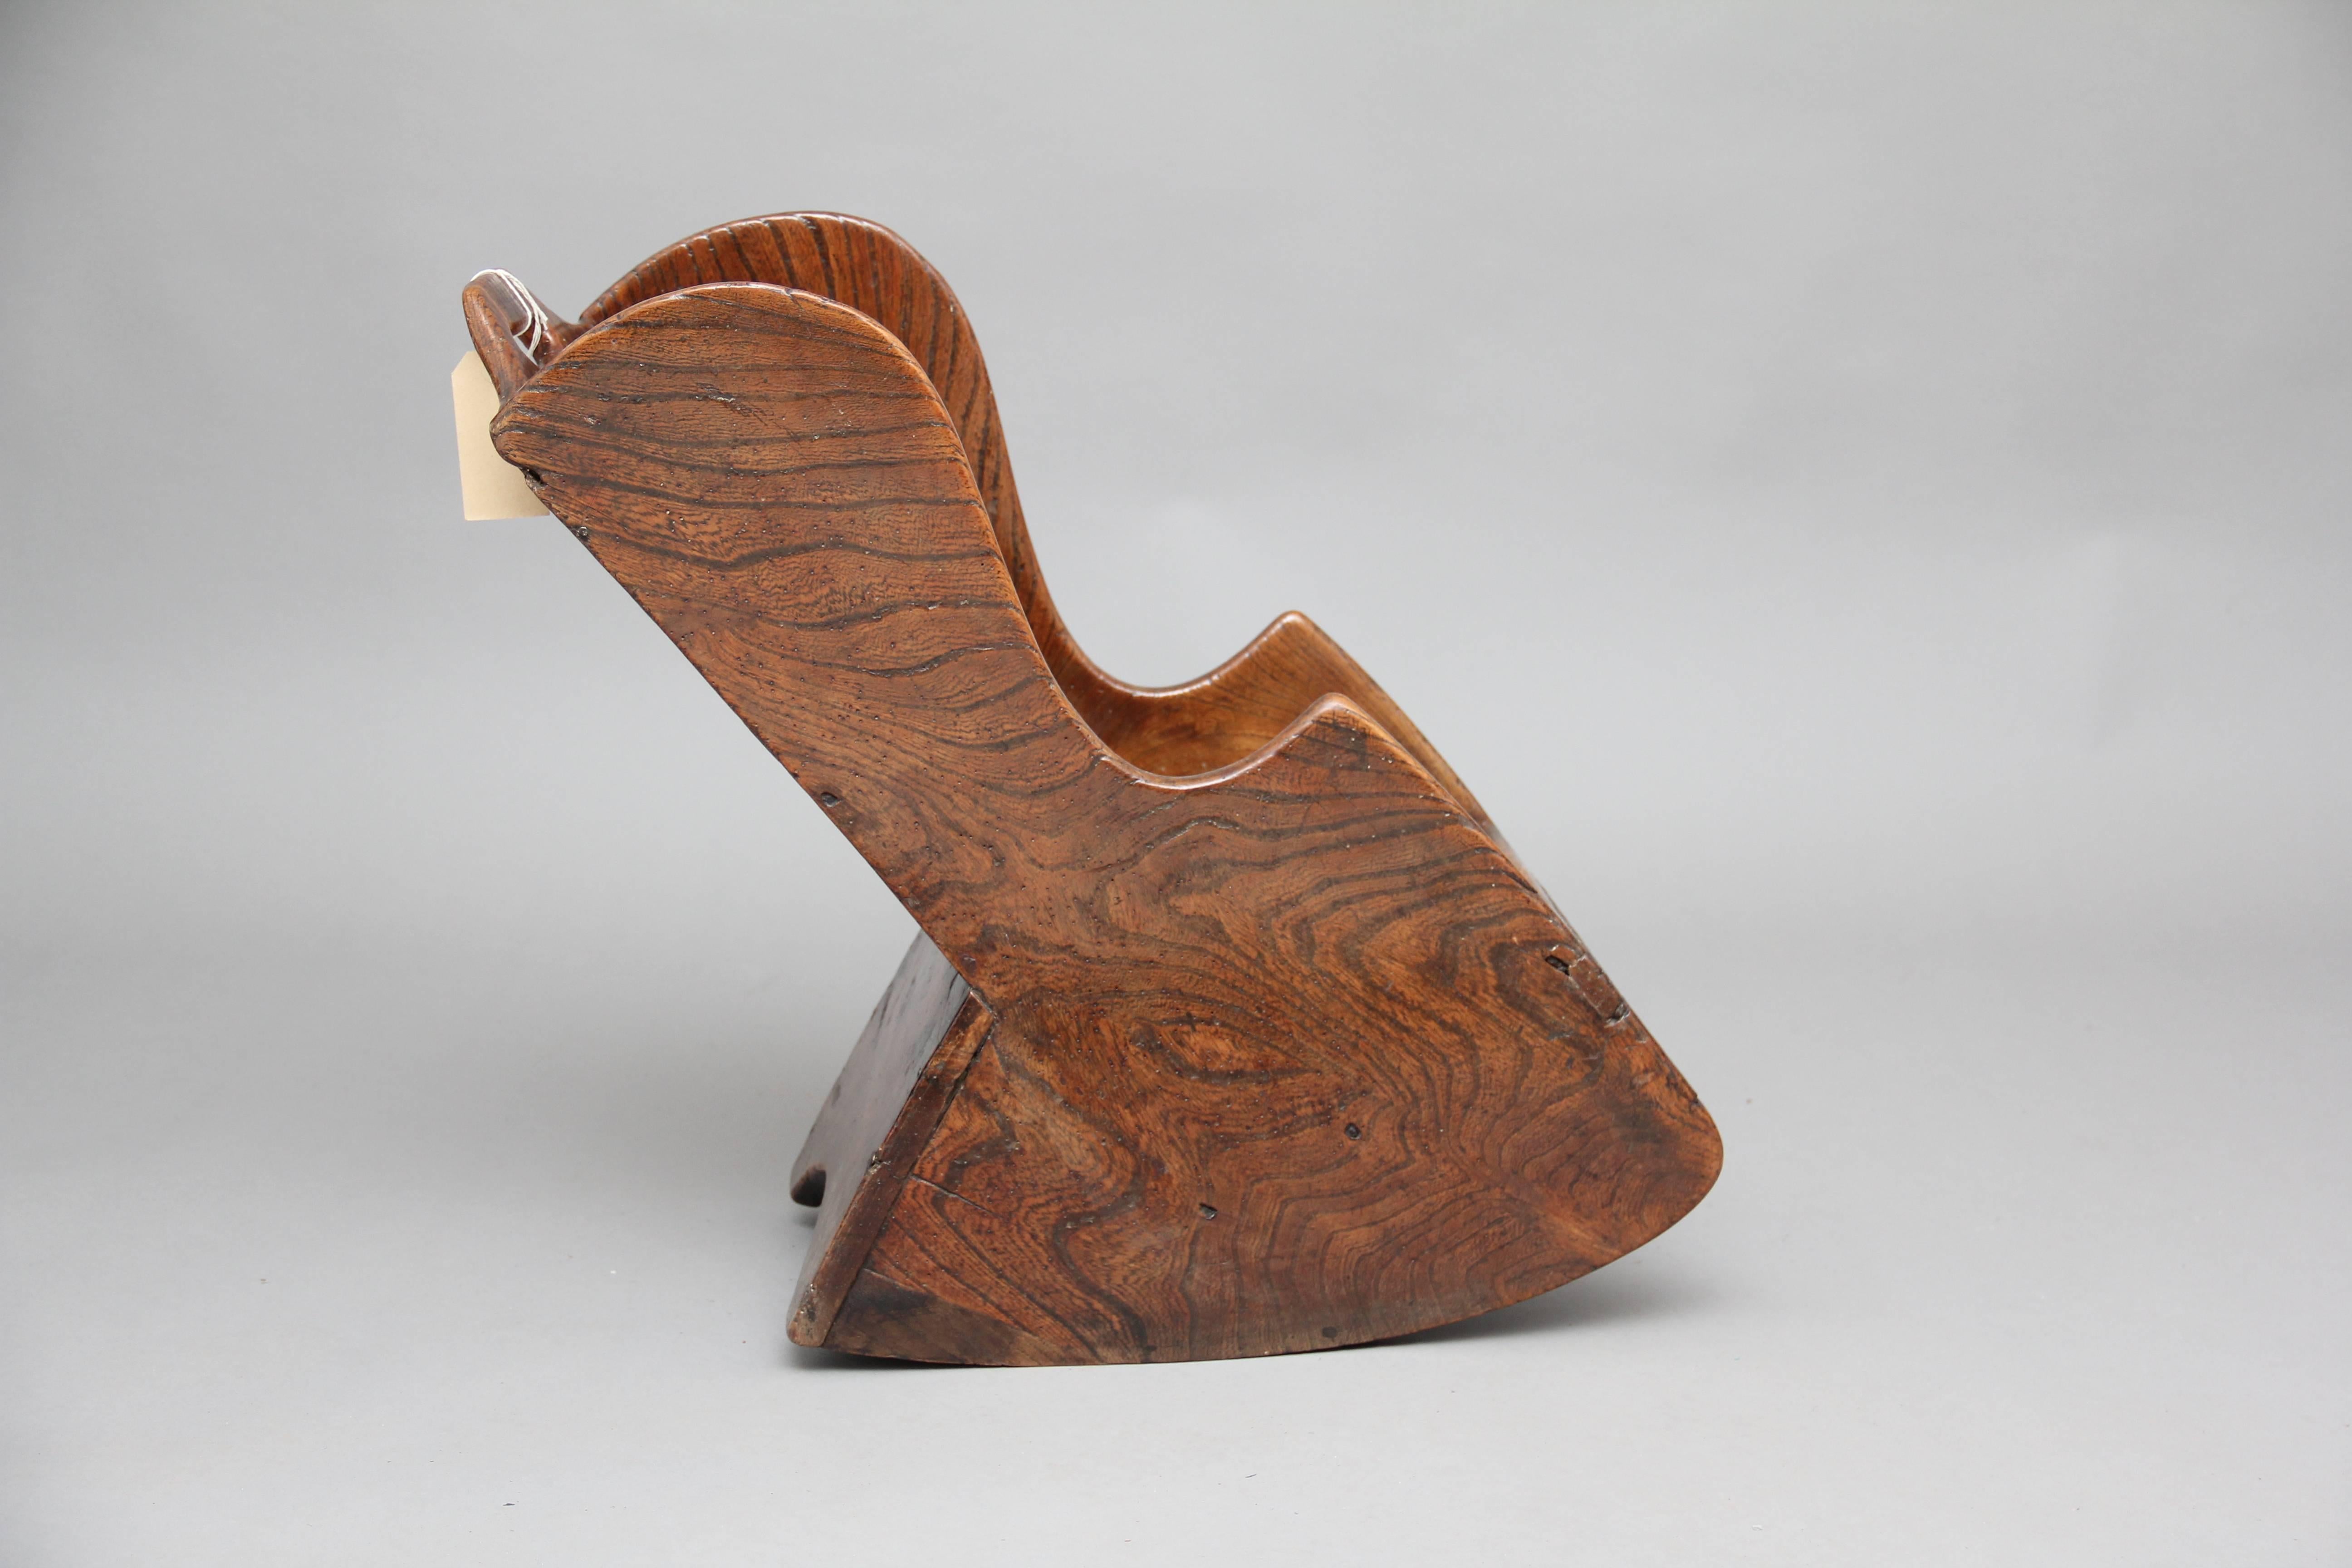 18th century elm child’s rocking chair, with the shaped sides and top rail with pierced hand holds, lovely patina, circa 1780.